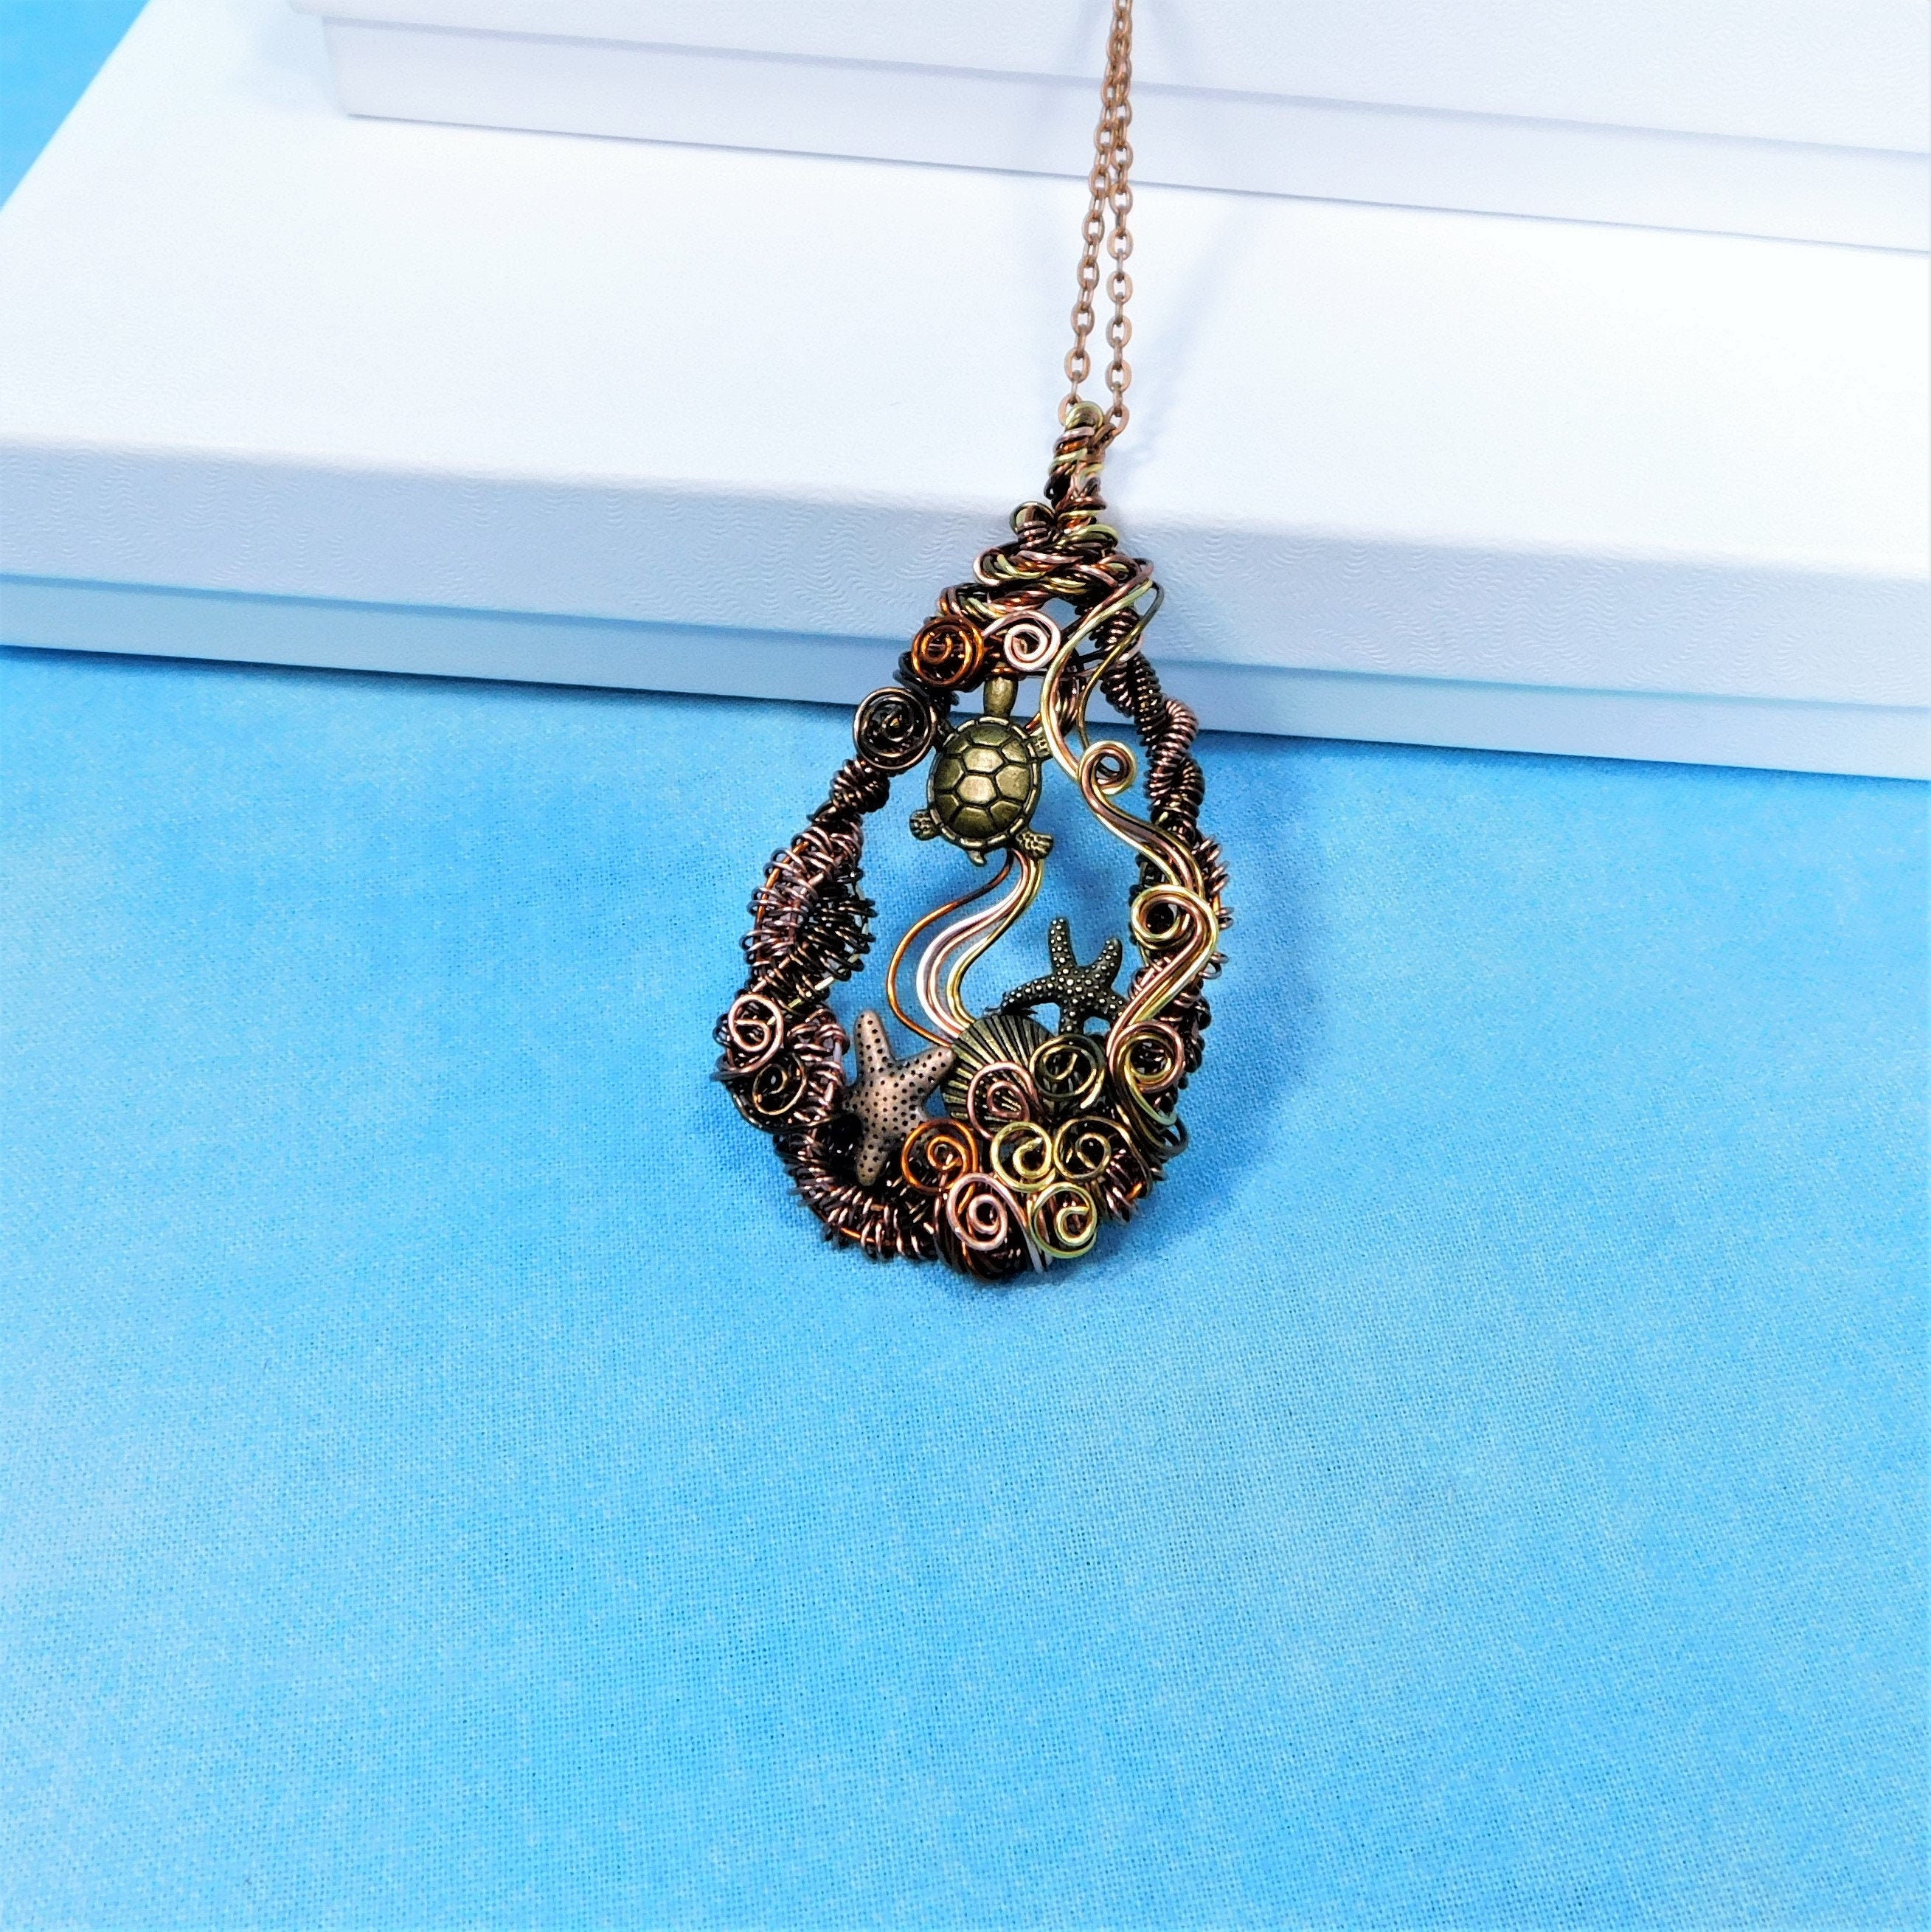 Woven Copper Sea Turtle Necklace, Artistic Handmade Wire Wrapped ...